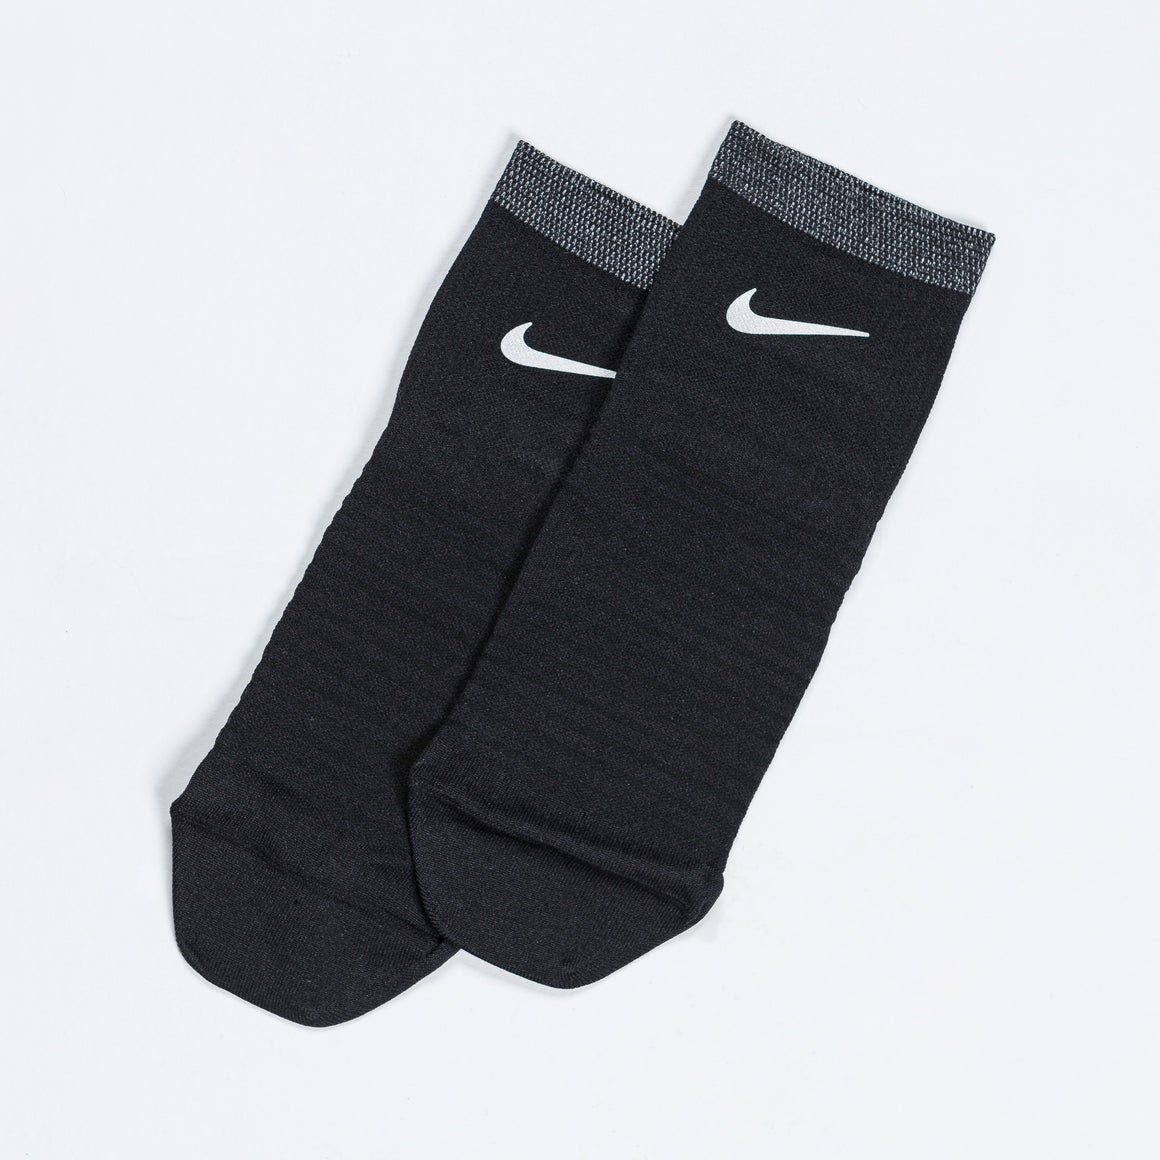 Nike - Spark Lightweight Ankle - Black/Reflective Silver - Up There Athletics